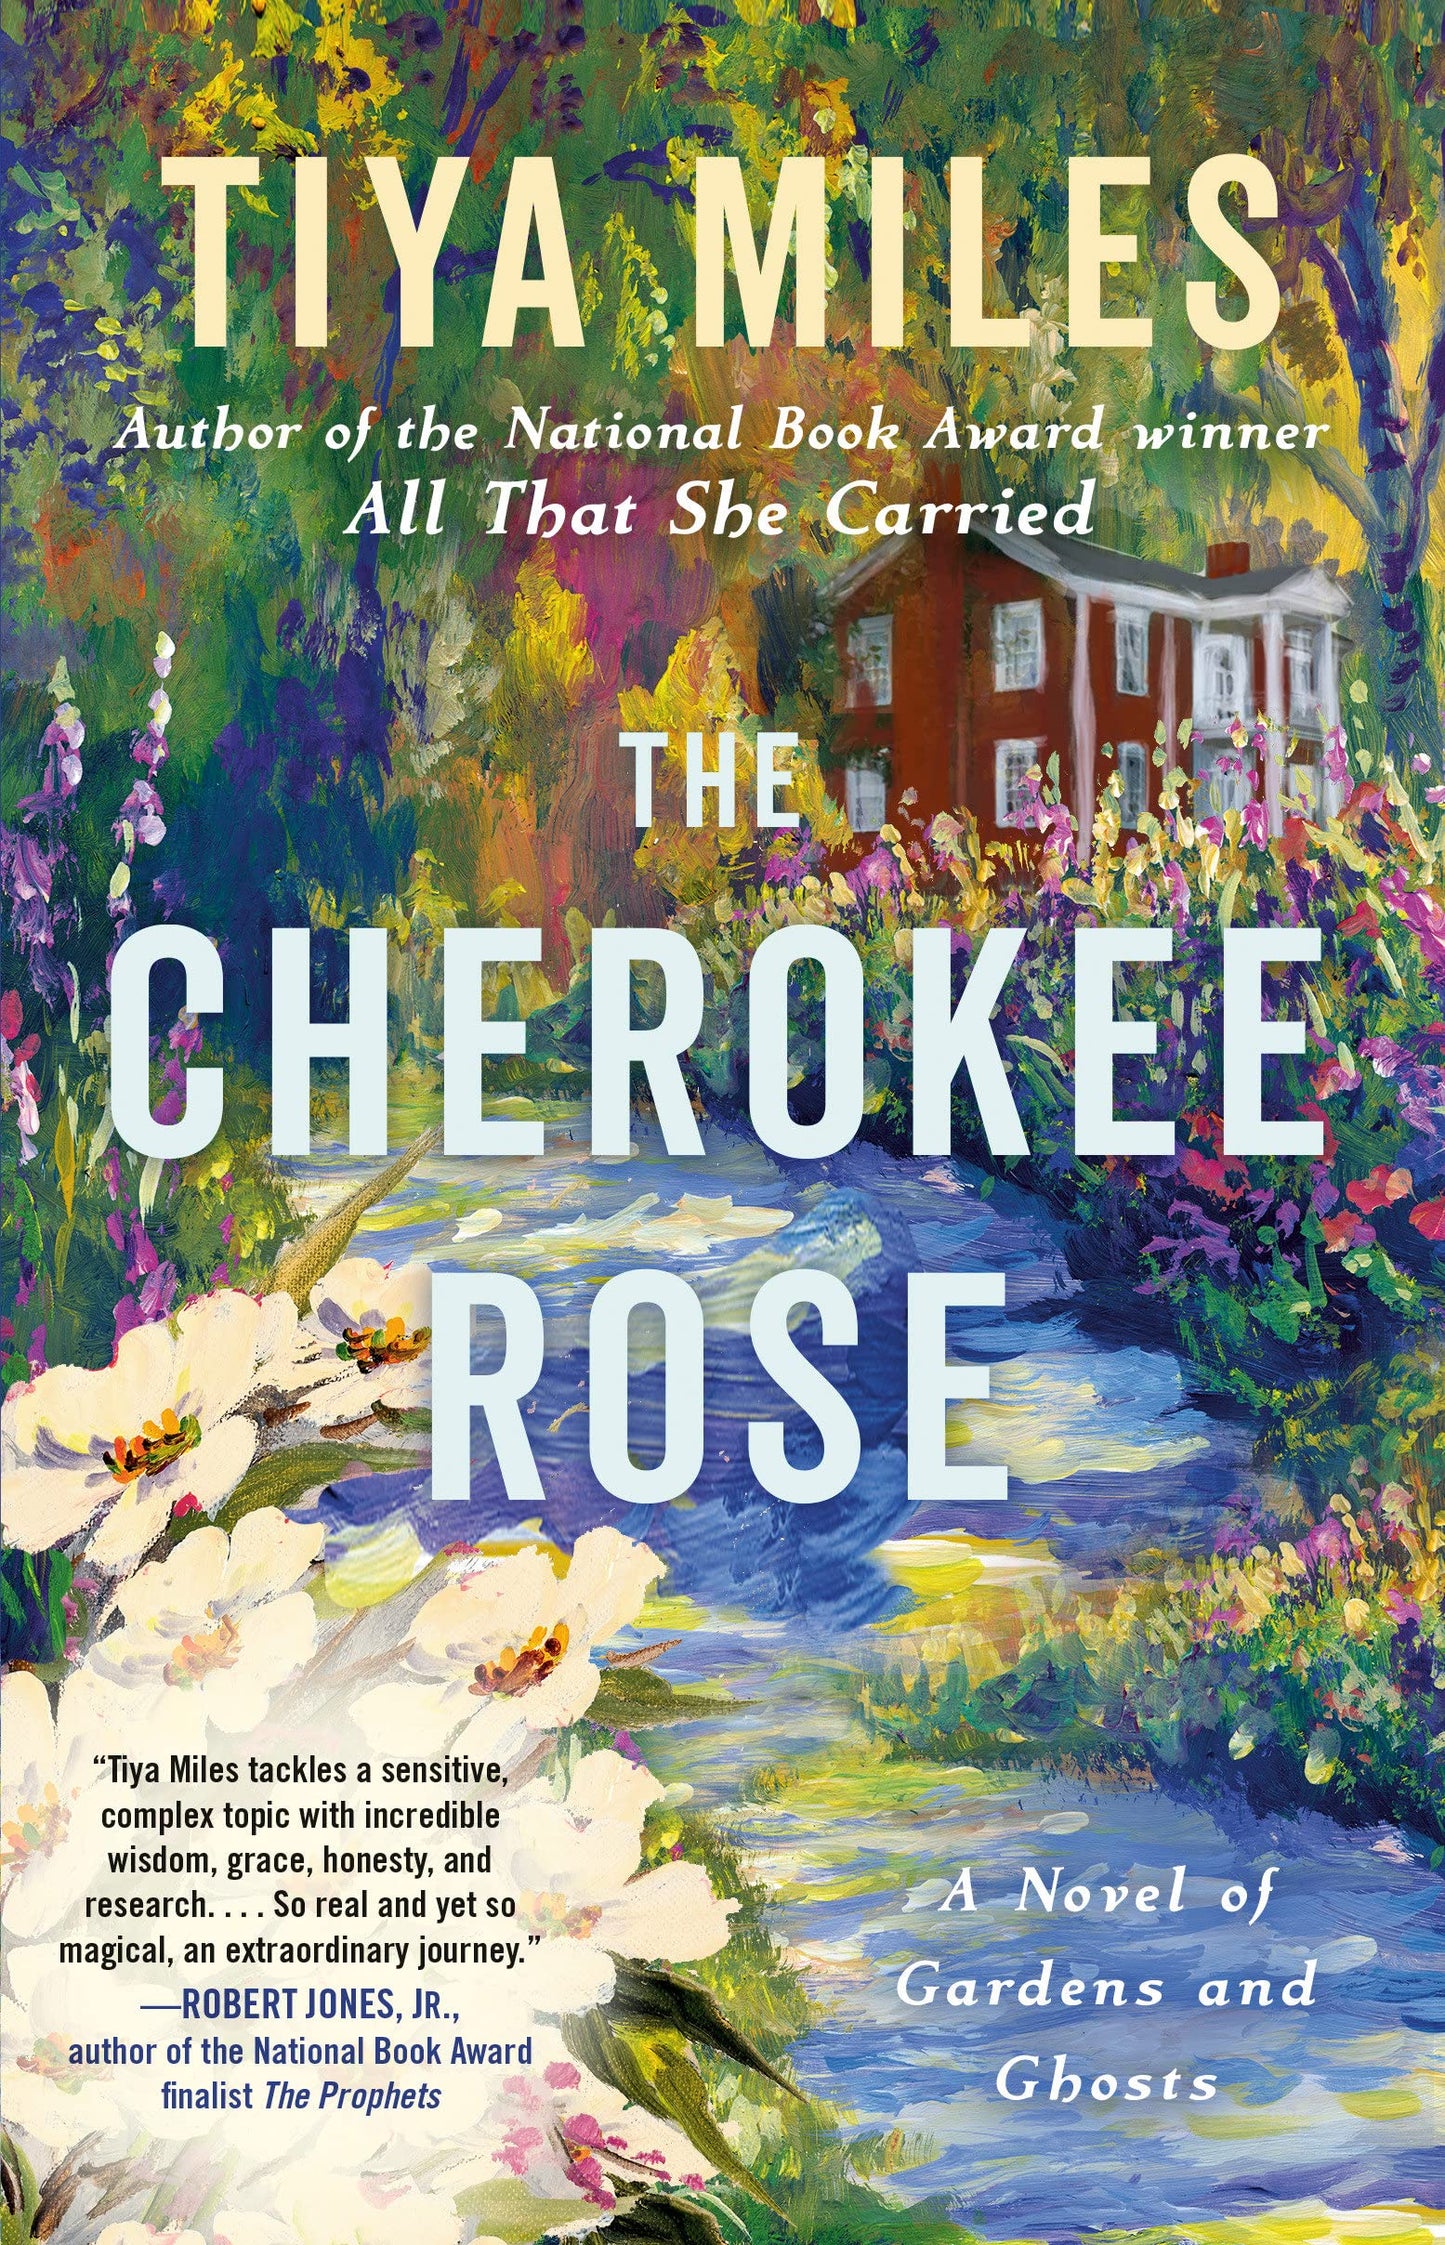 The Cherokee Rose // A Novel of Gardens and Ghosts